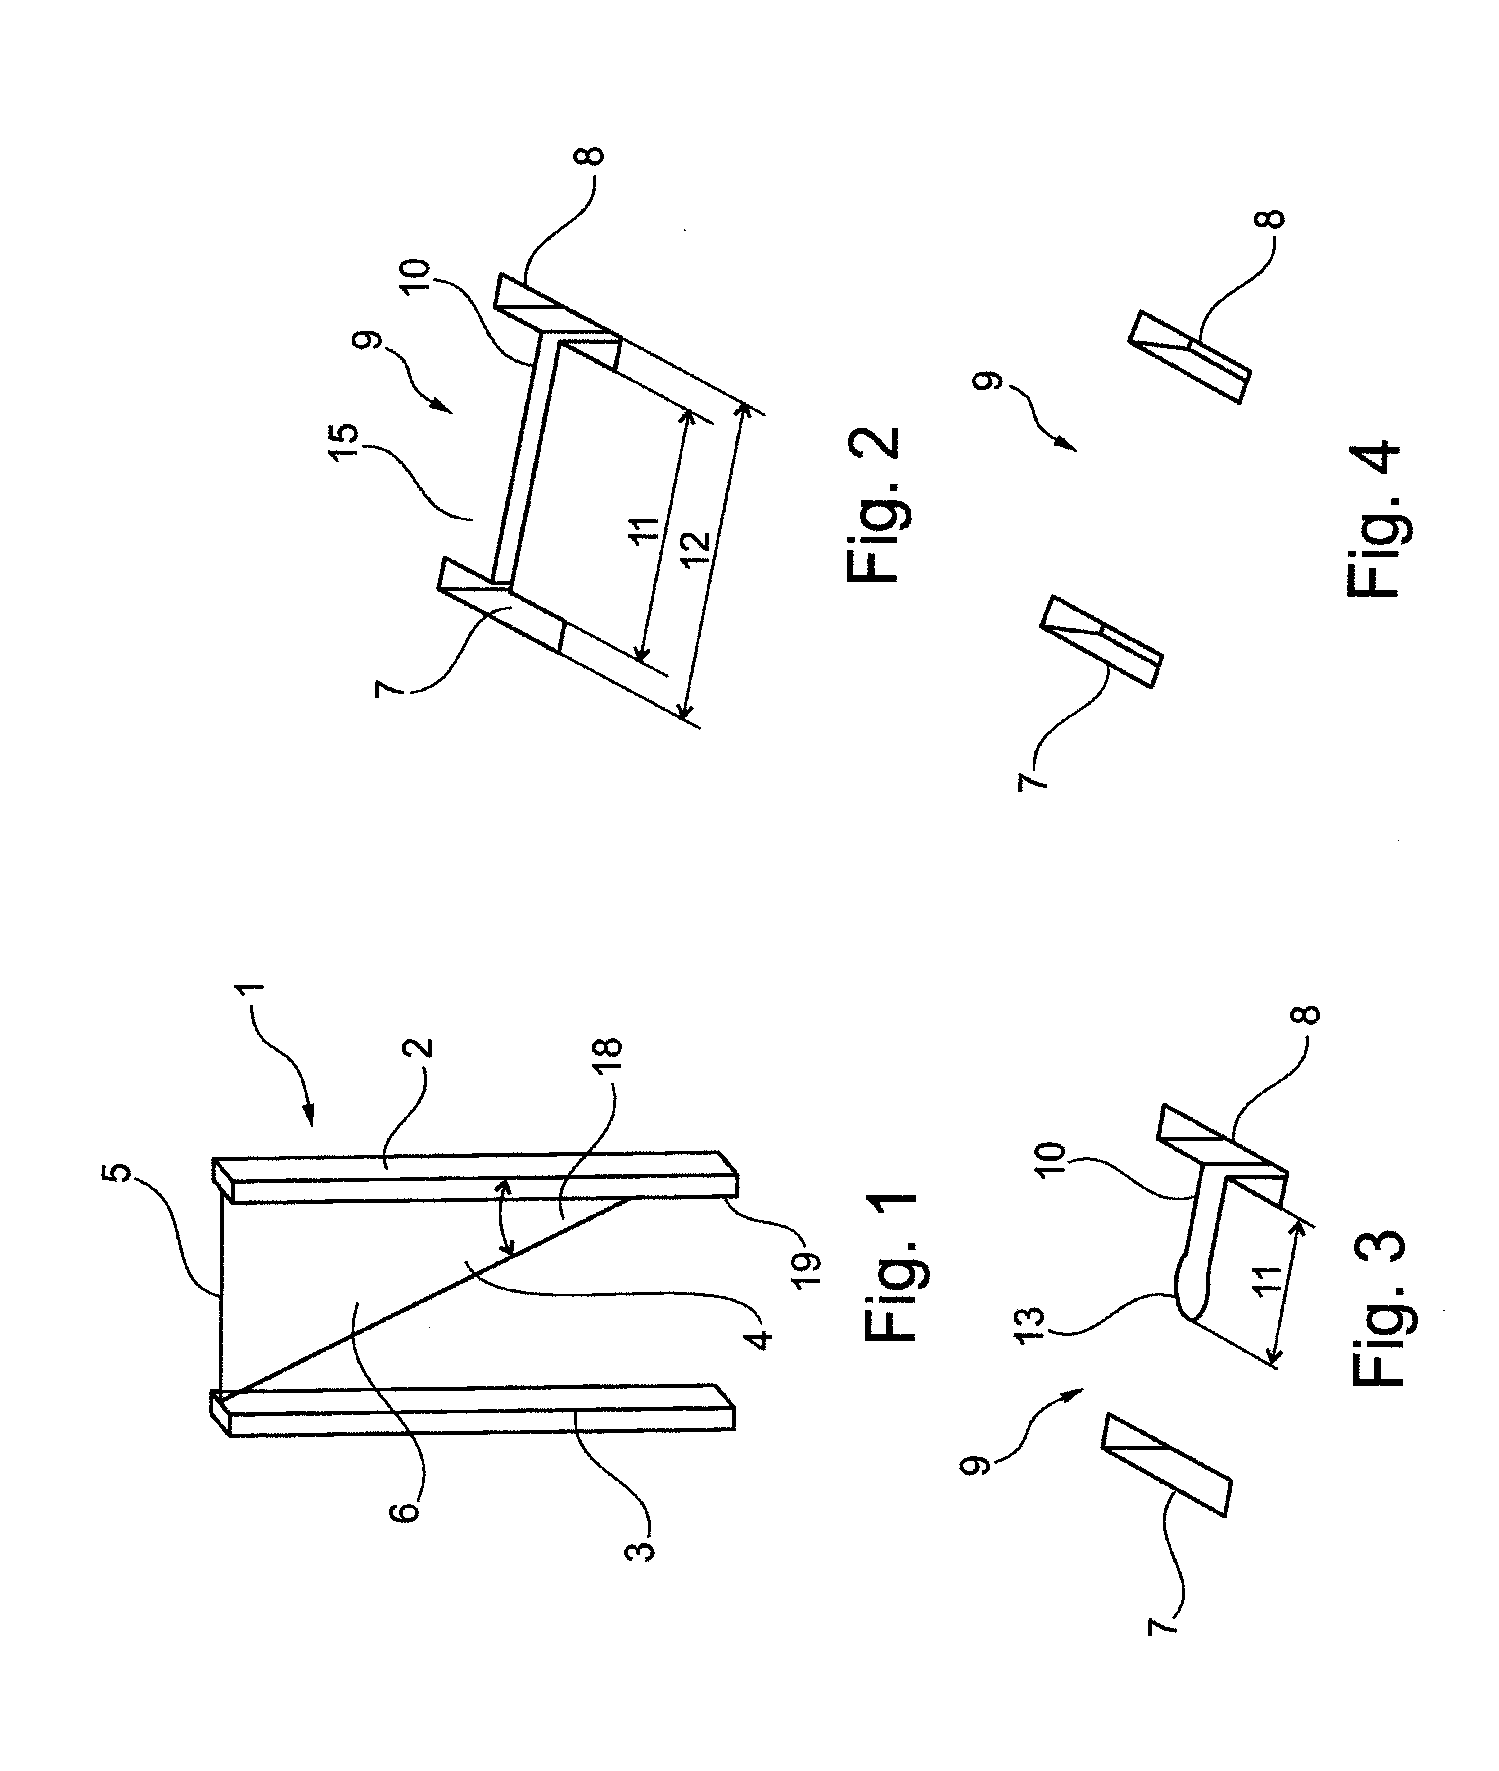 Method for determining the tread depth of a vehicle pneumatic tire